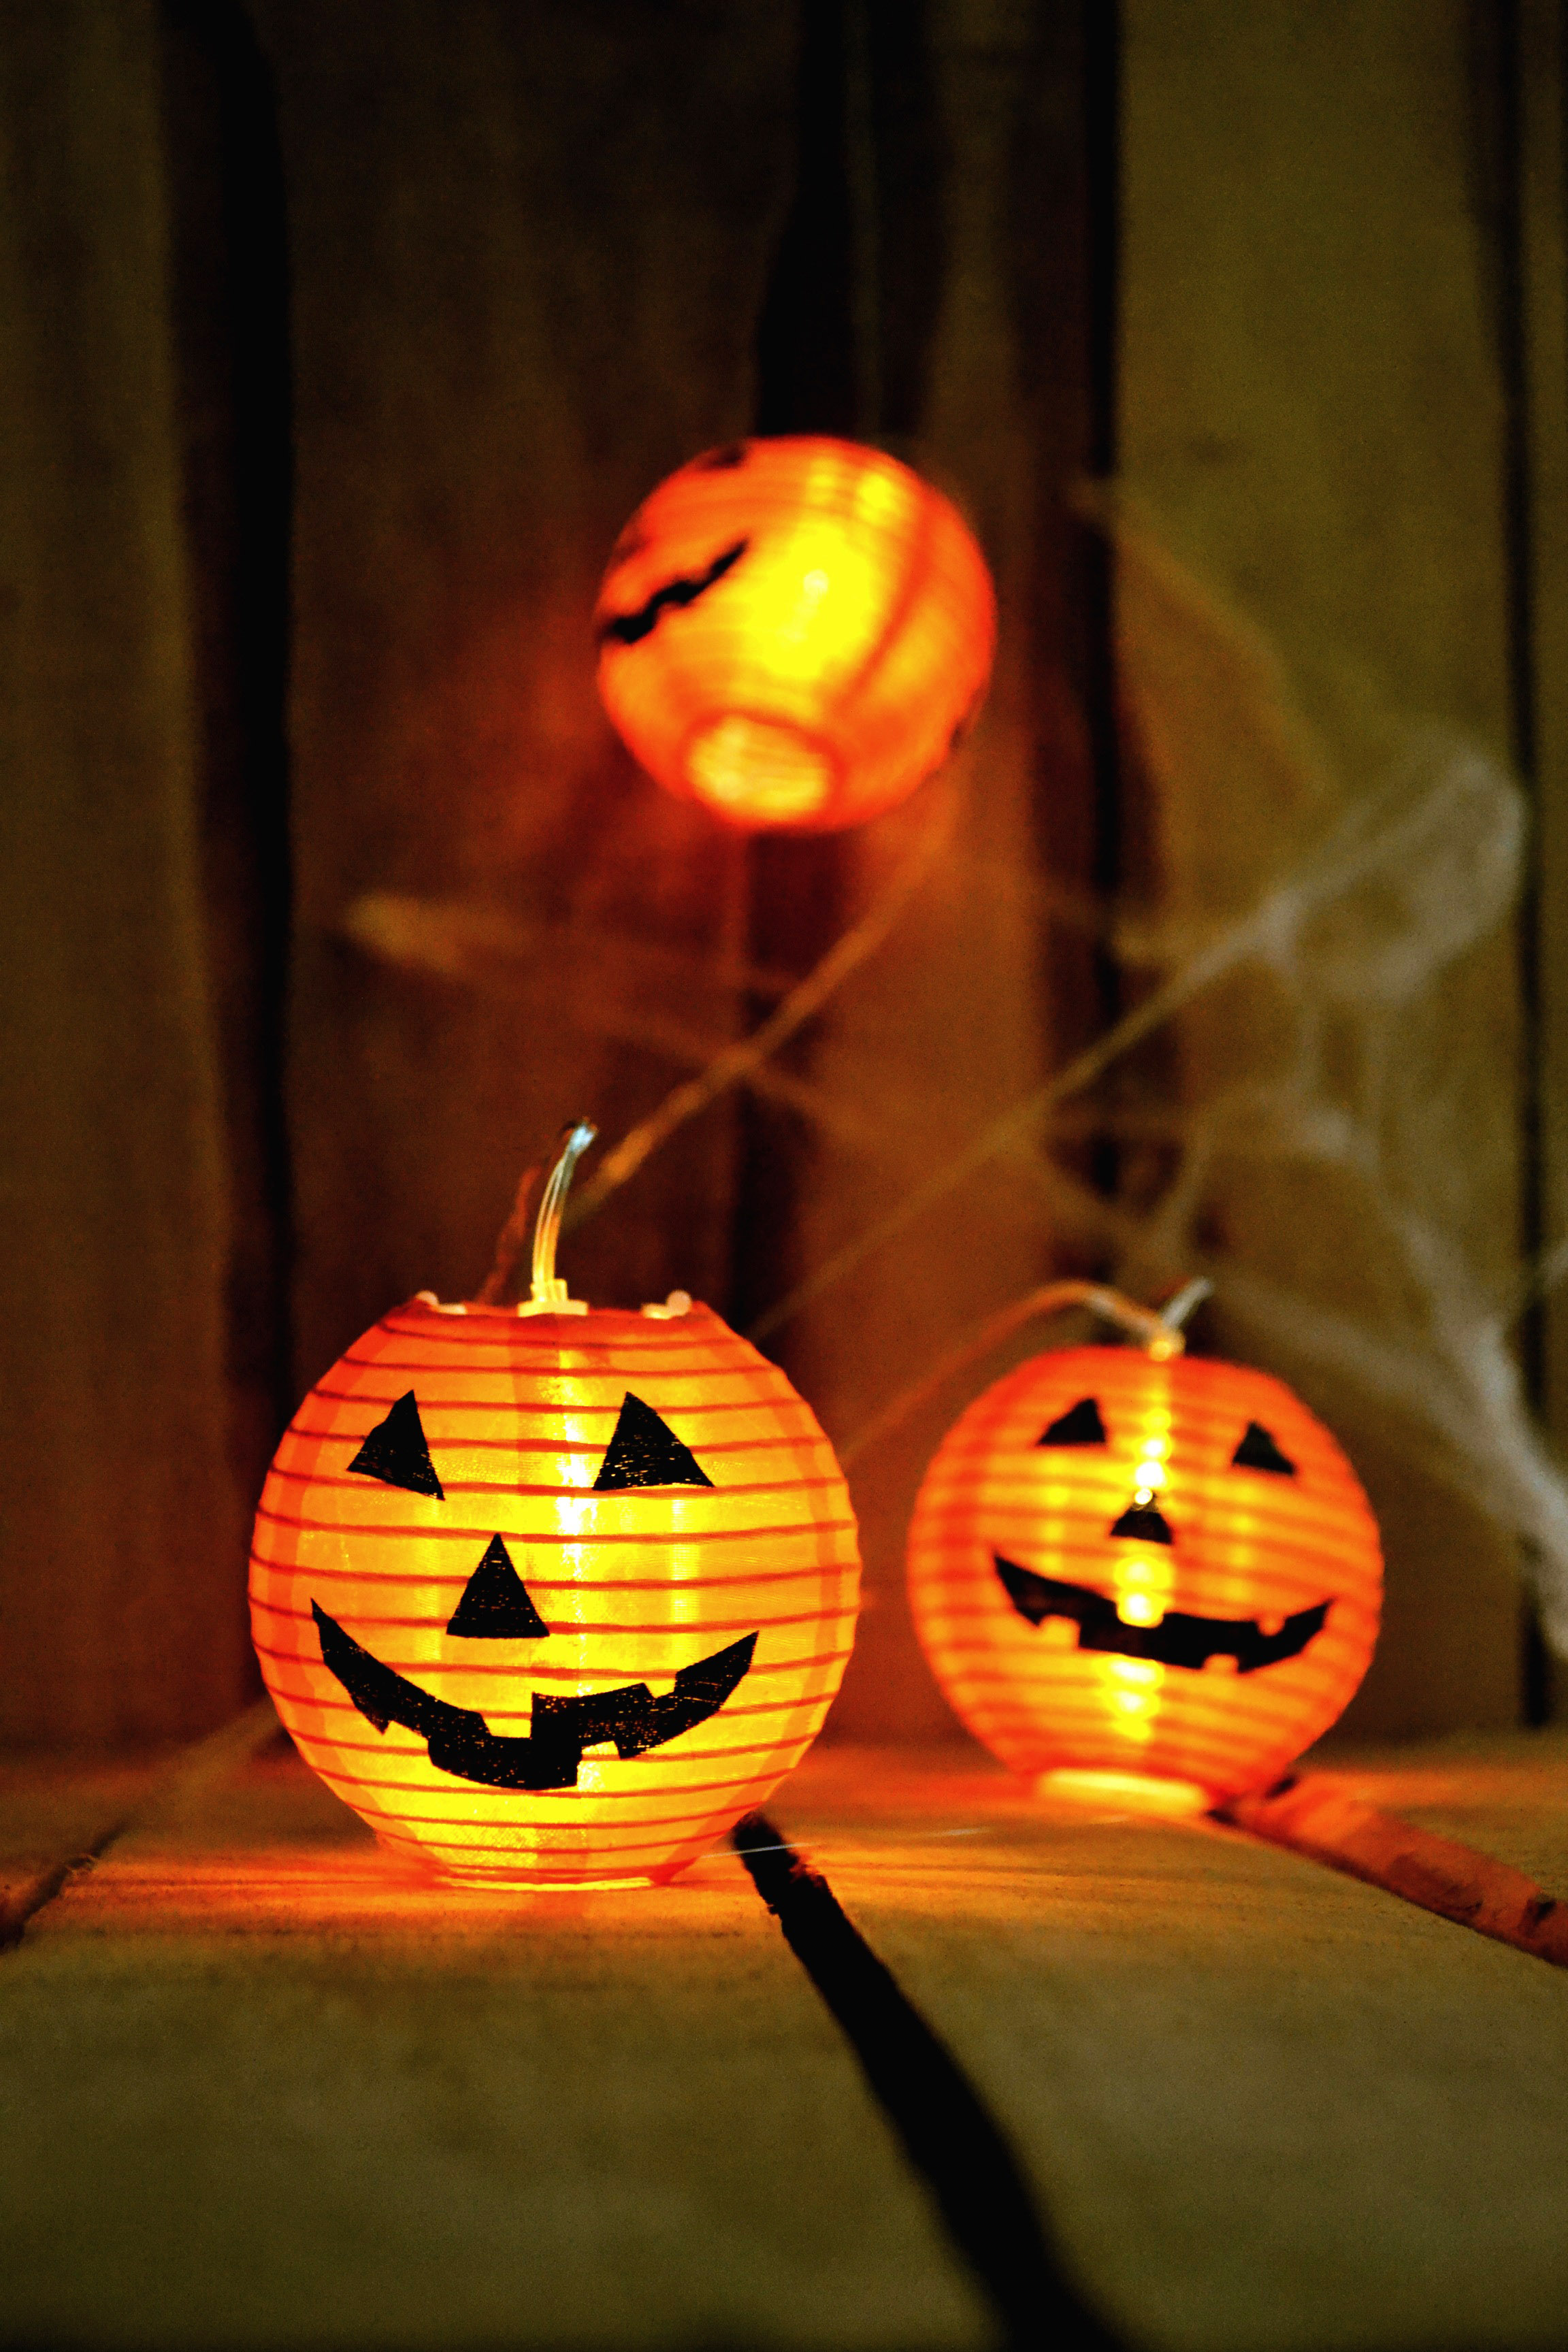 Three Jack-o-Lanterns and a spider's web Halloween decorations.